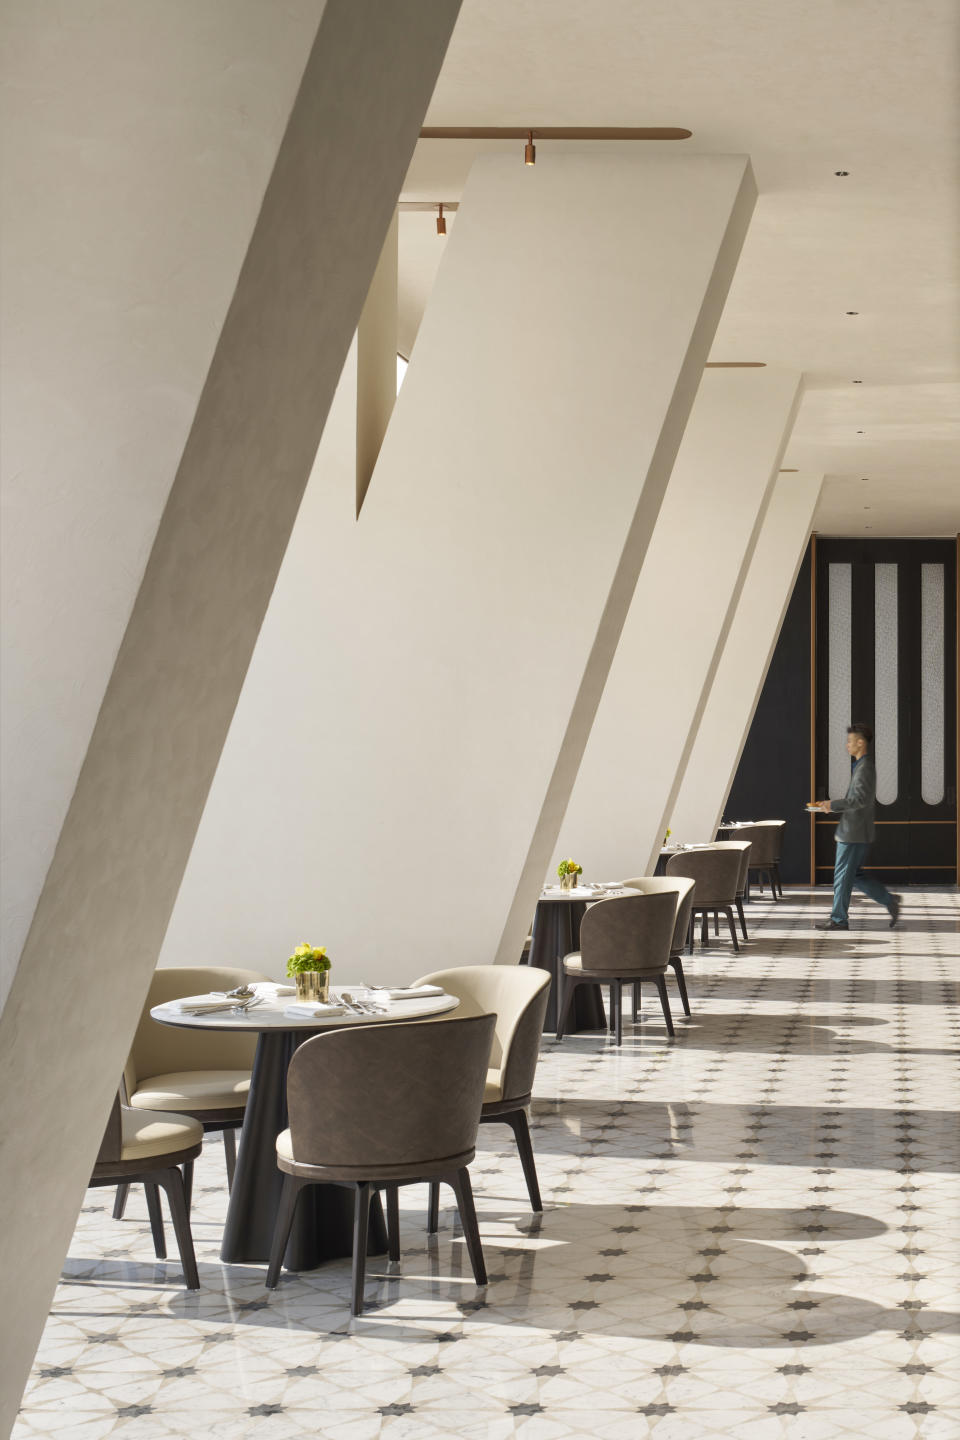 A look at Harmonia, an all-day dining offer inside Regent Shanghai on the Bund